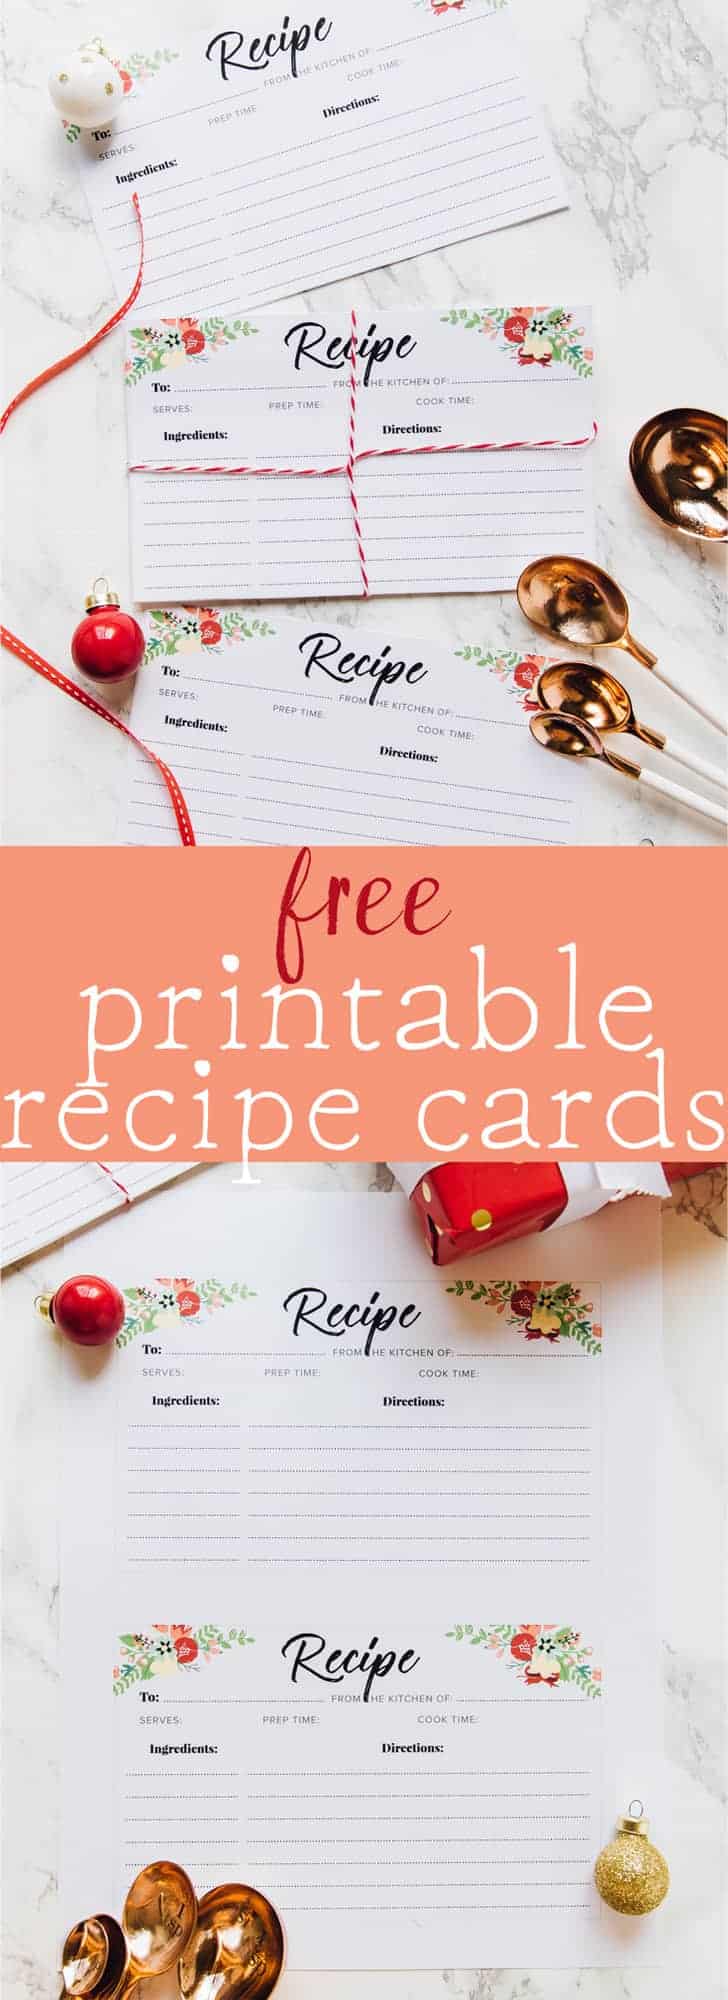 Here are free printable recipe cards for you! You can use them in your own kitchen, or even make a food gift and gift a friend with the recipe! Enjoy! via https://jessicainthekitchen.com